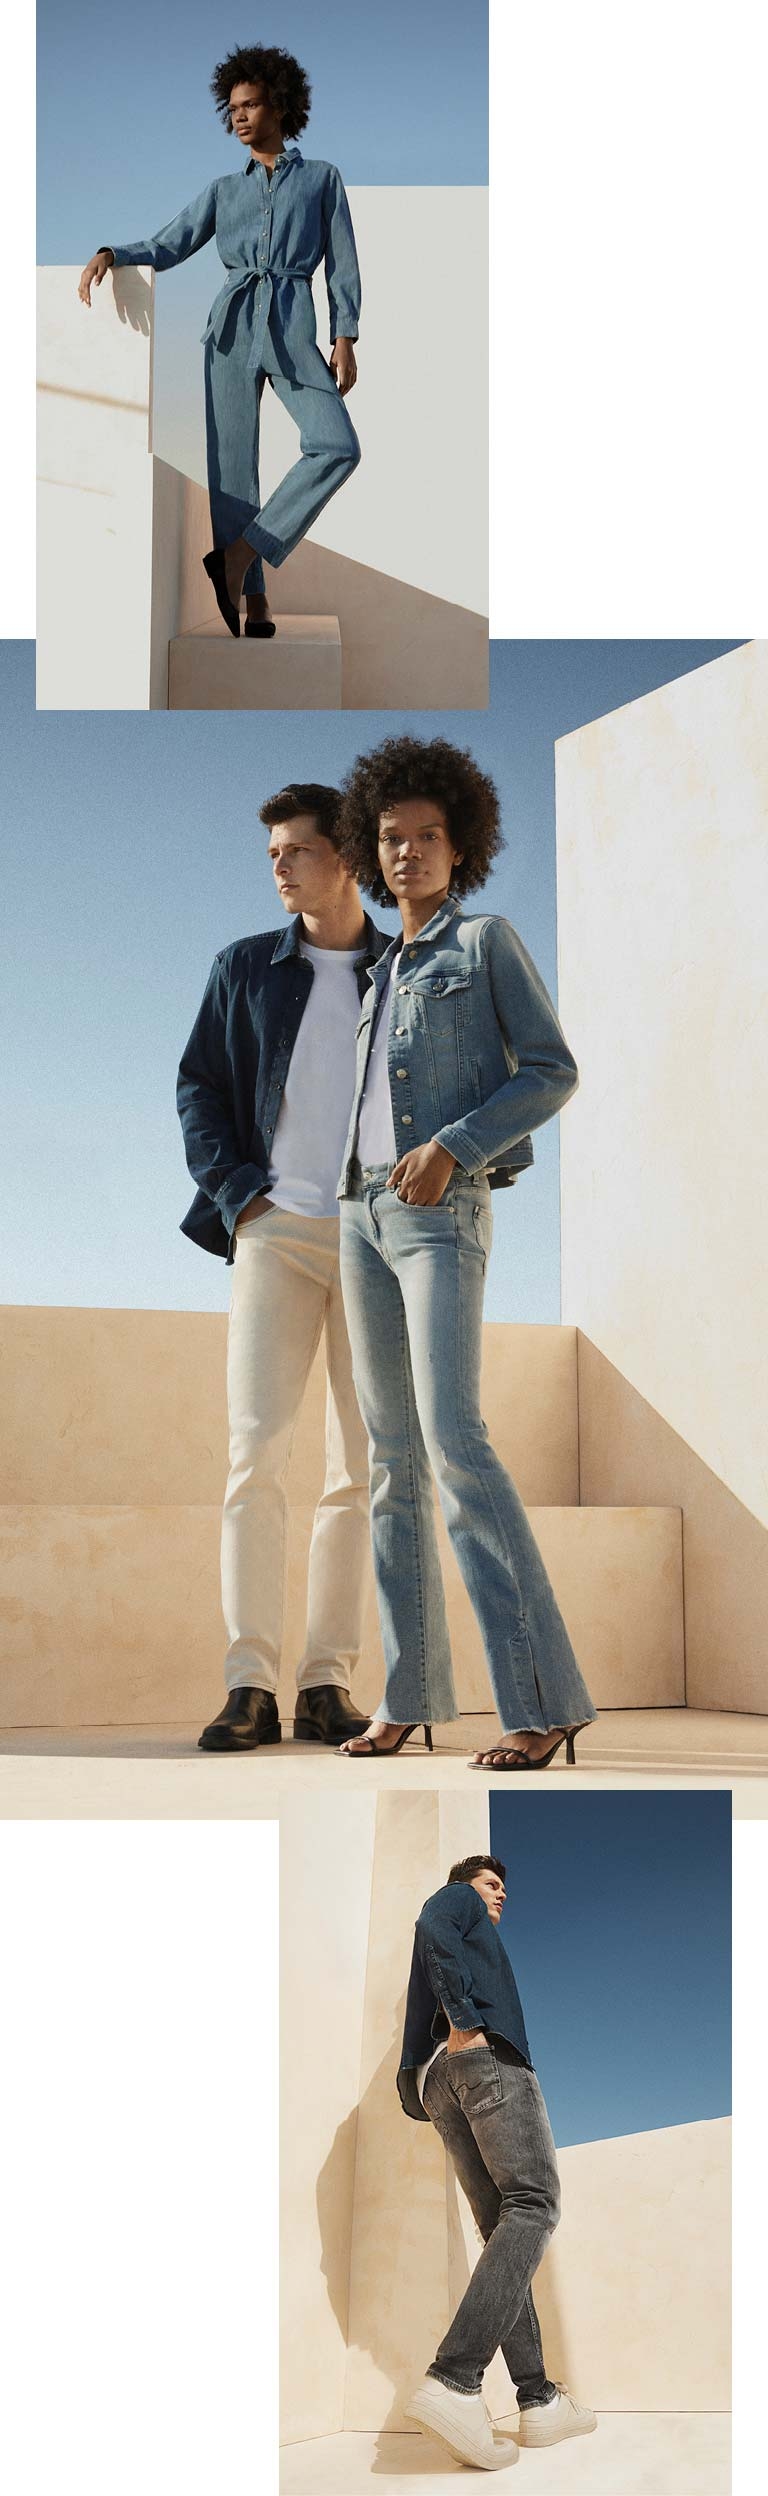 7 For all Mankind - Luxe Vintage